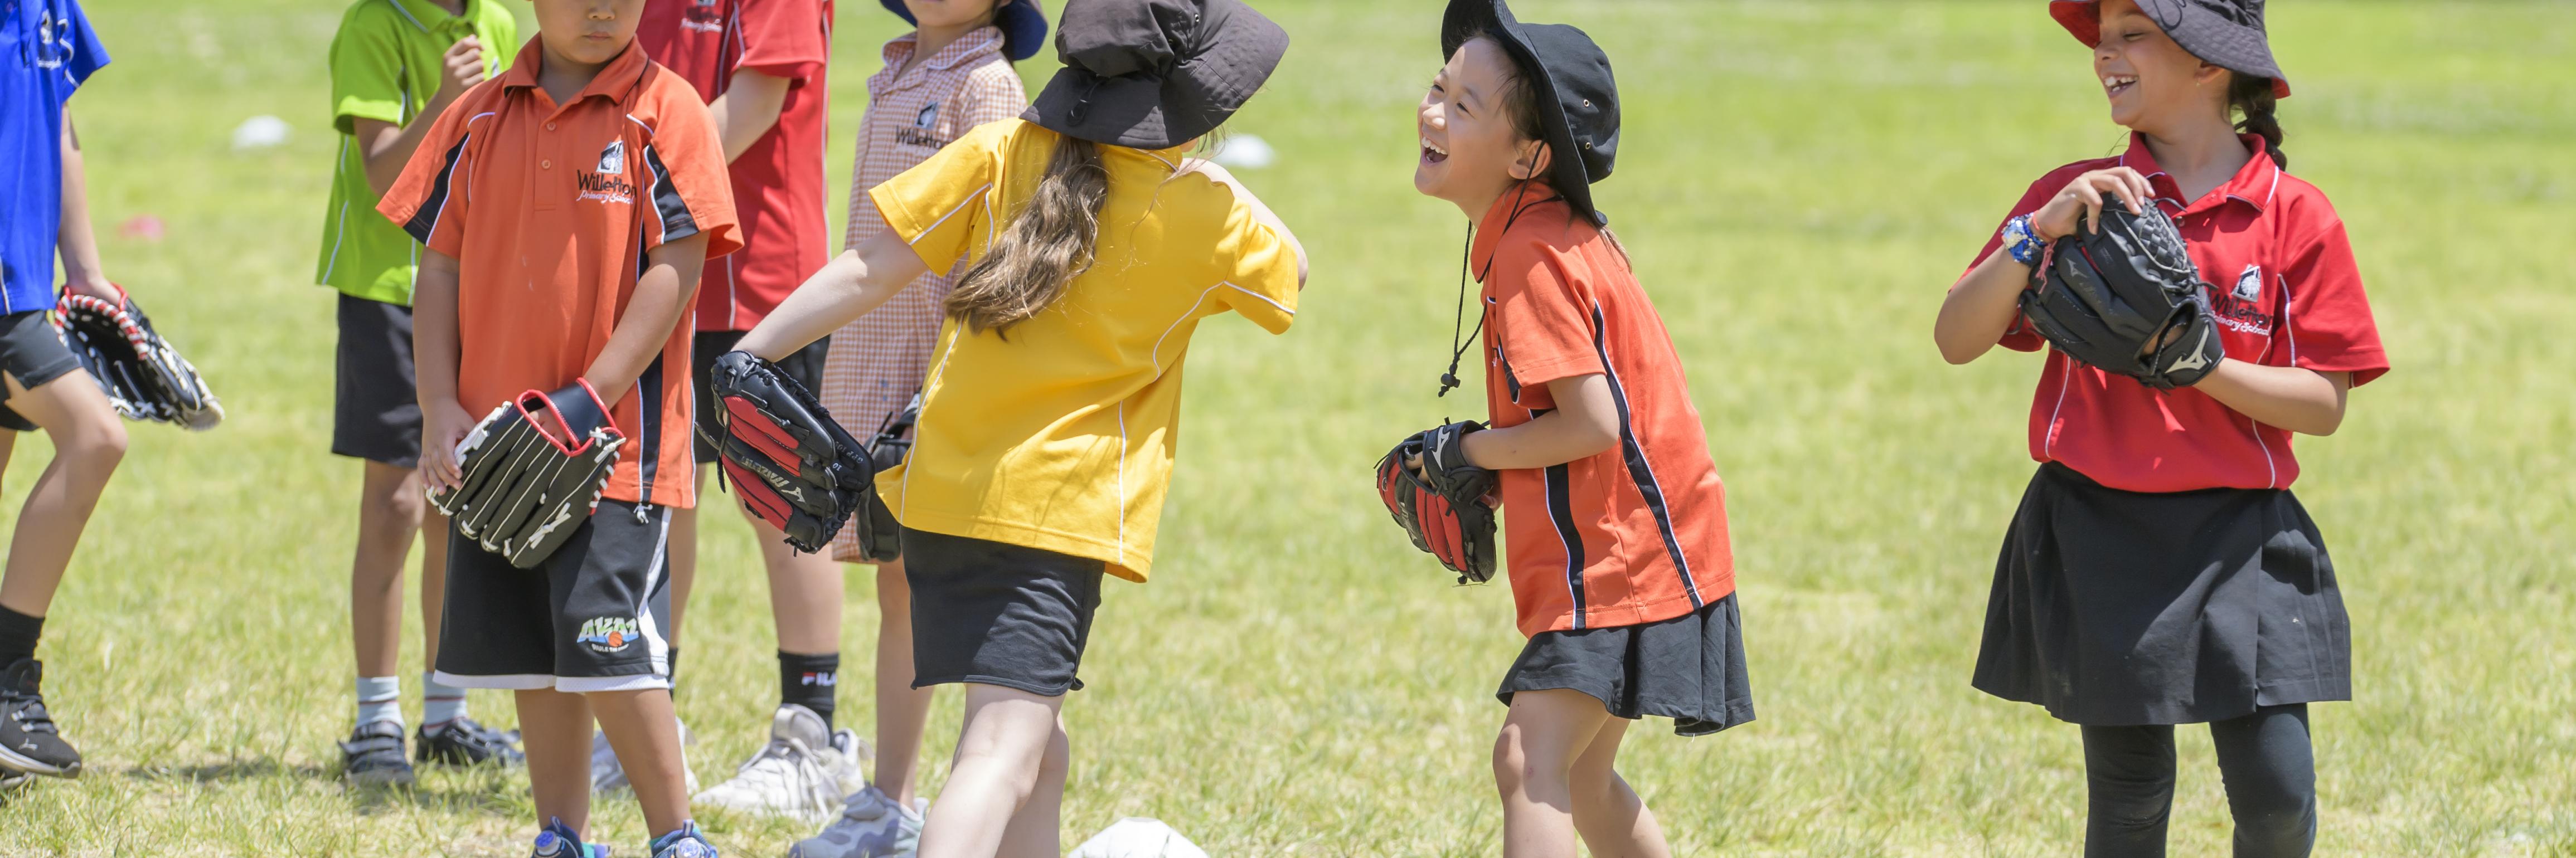 girl 1 is in a yellow faction shirt and has a tee ball glove on. she is walking away from the camera towards girl 2 who is facing towards camera and is laughing at girl 1. girl 3 is in a red faction shirt and is off center to the right, looking and smiling towards girl 1 and 2 in center frame.